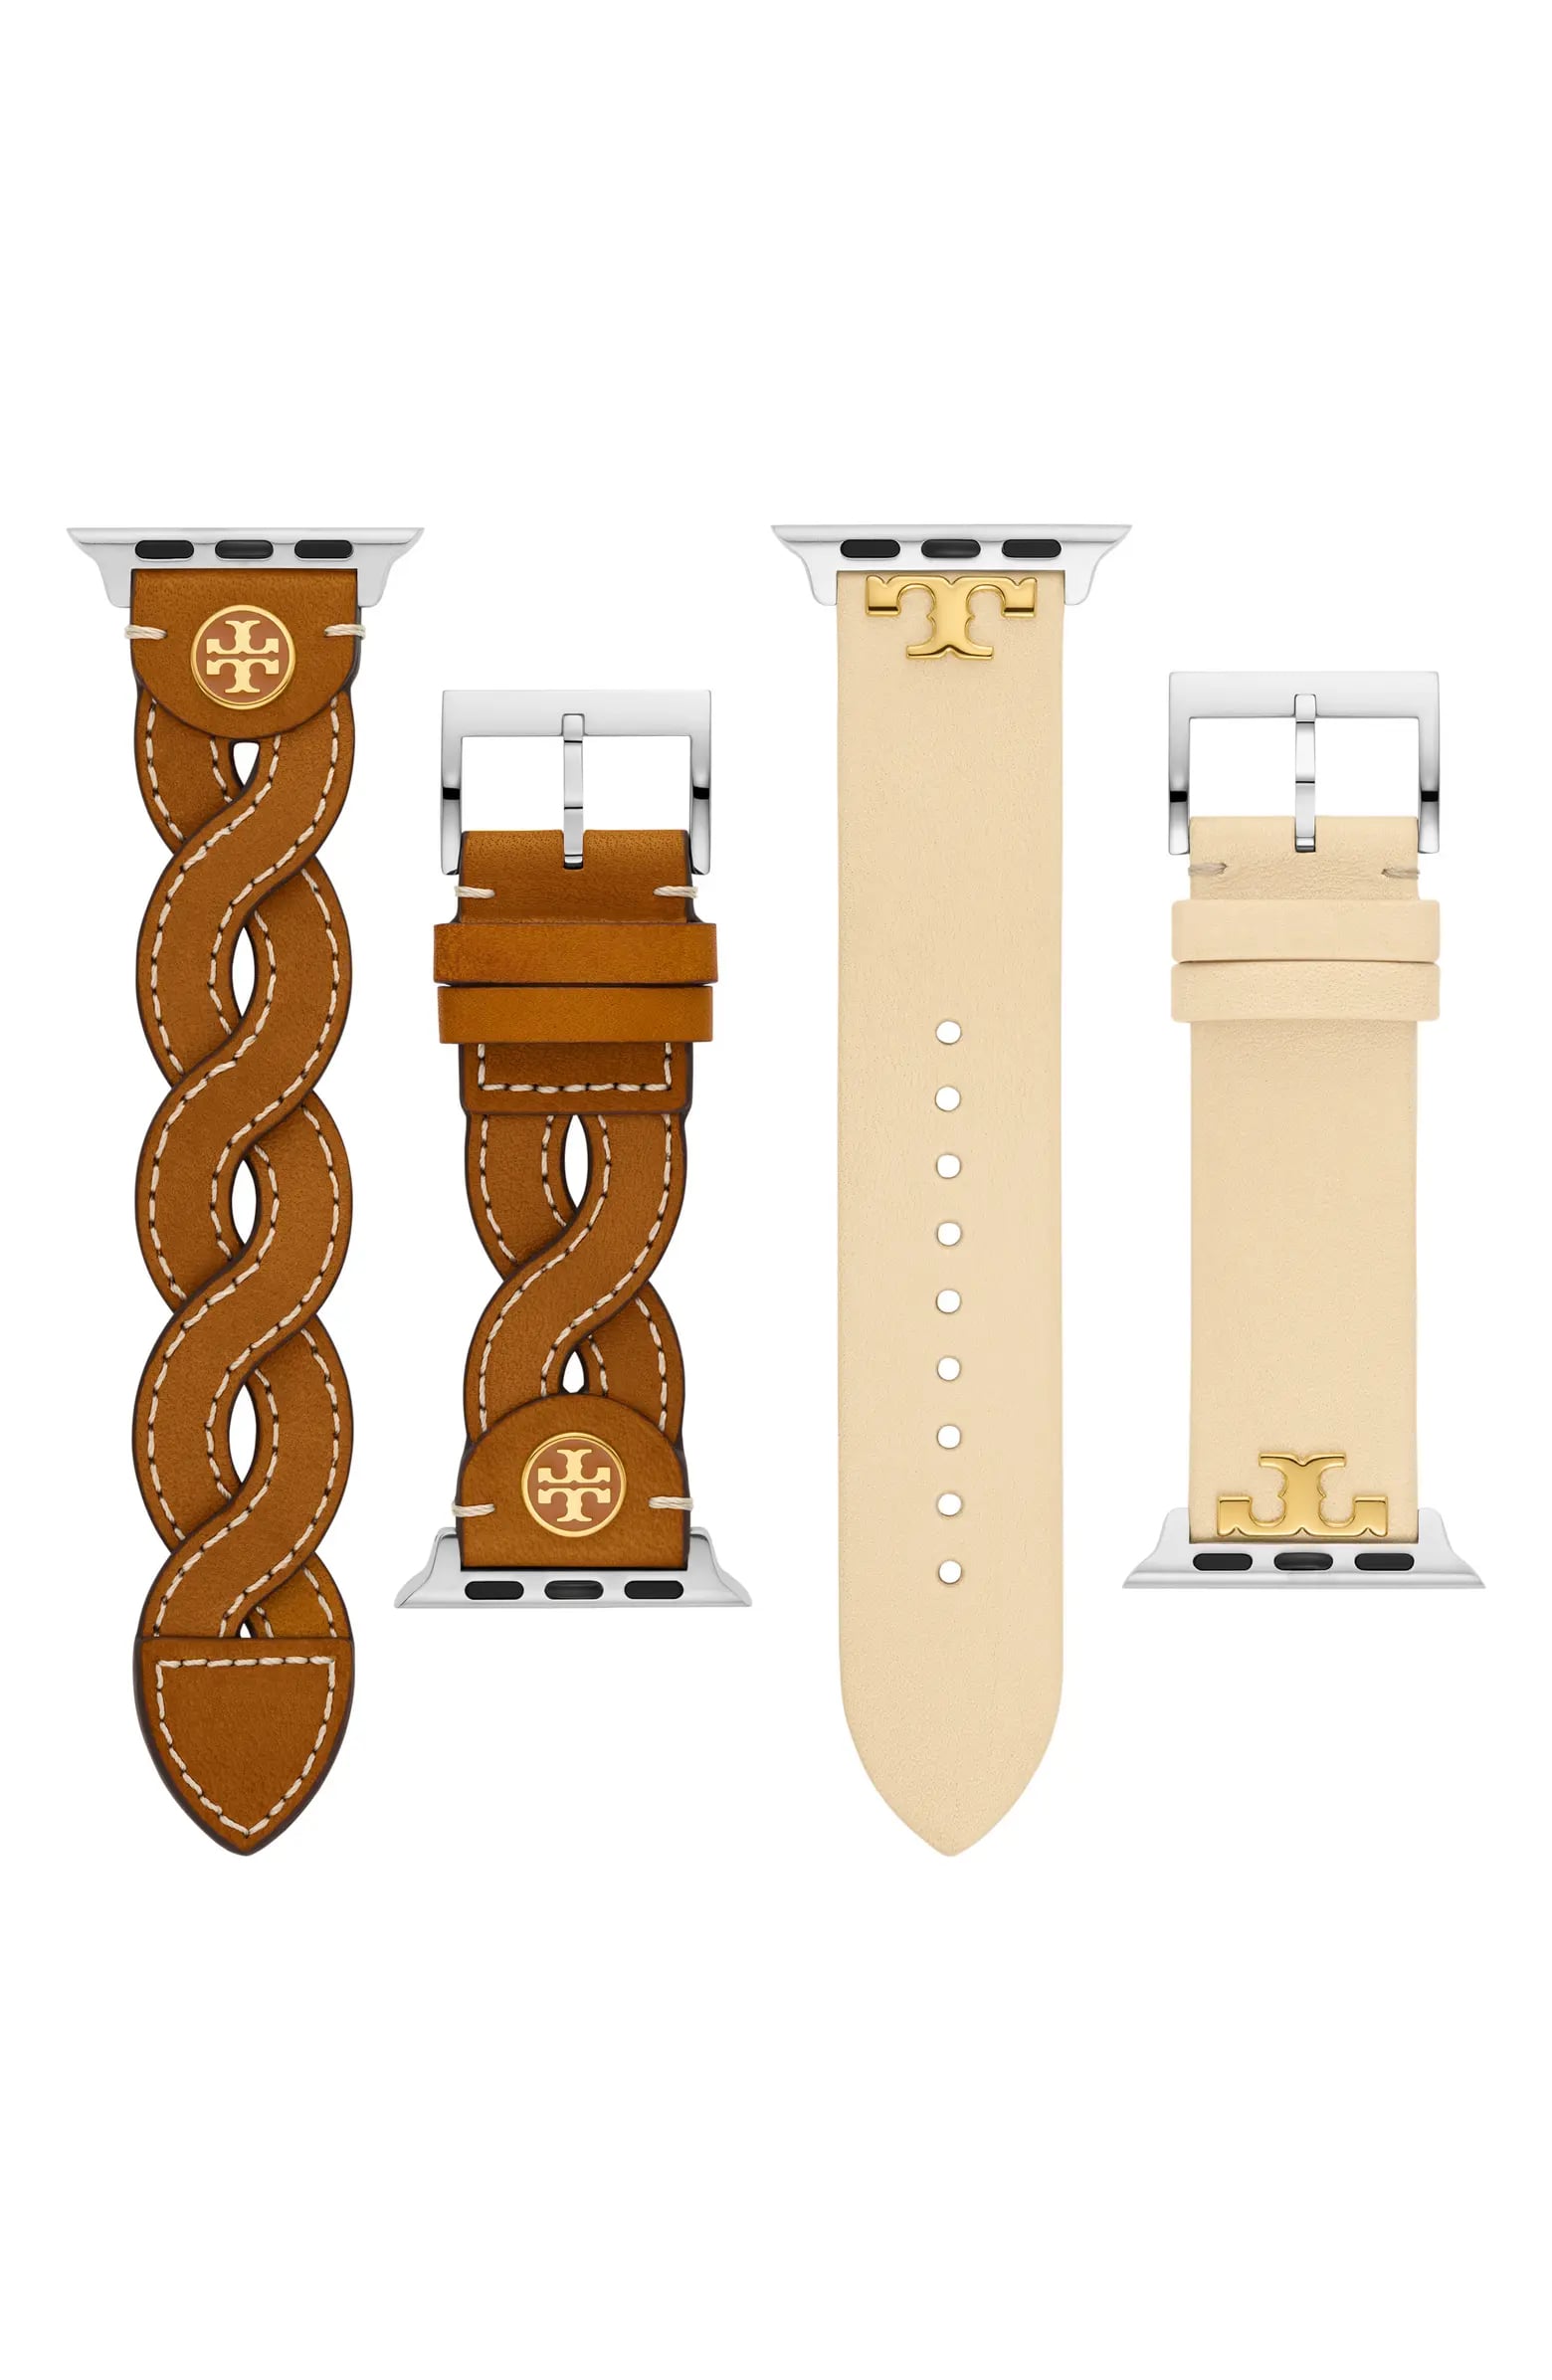 Designer Apple Watch Bands: Tory Burch Bands For Apple Watch Gift Set | 16  Stylish Apple Watch Bands For Every Occasion | POPSUGAR Tech Photo 6